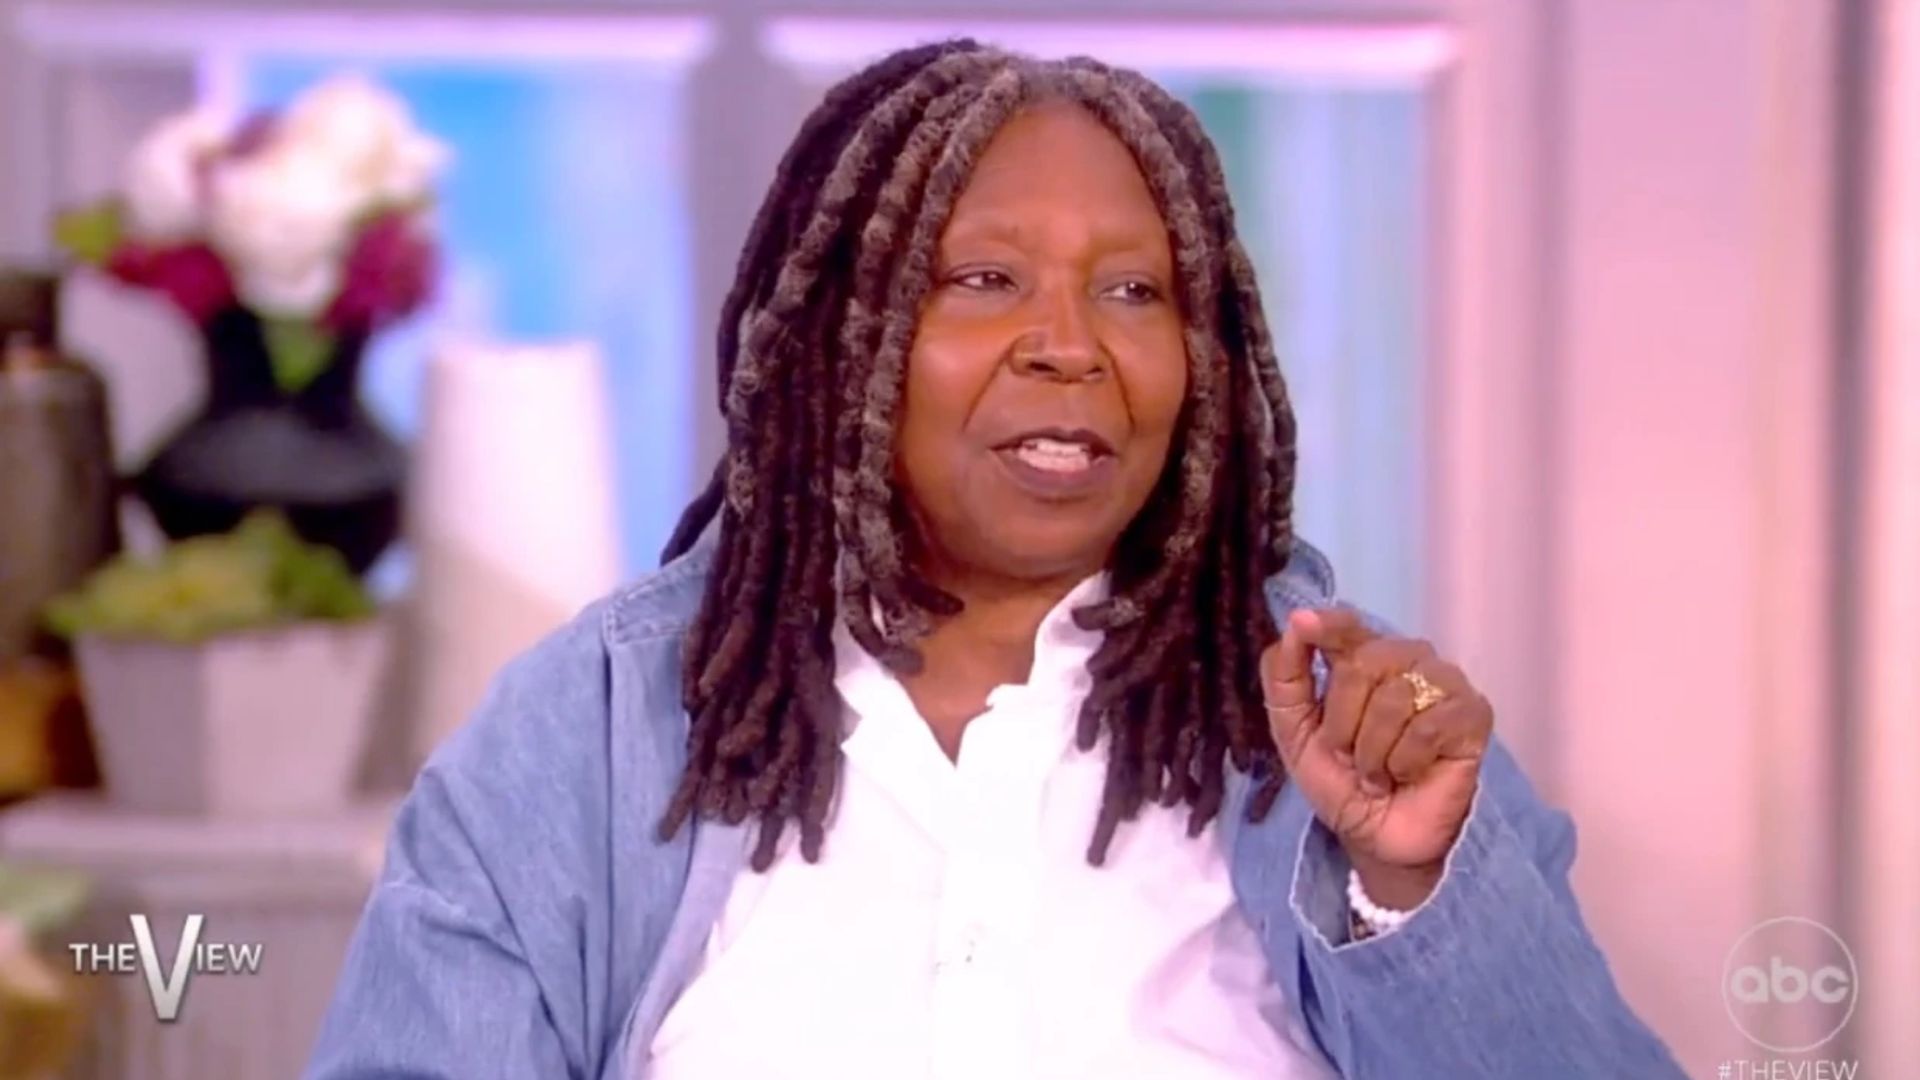 Whoopi Goldberg furiously defends Malia Ann after Barack Obama's daughter faces backlash for changing her name